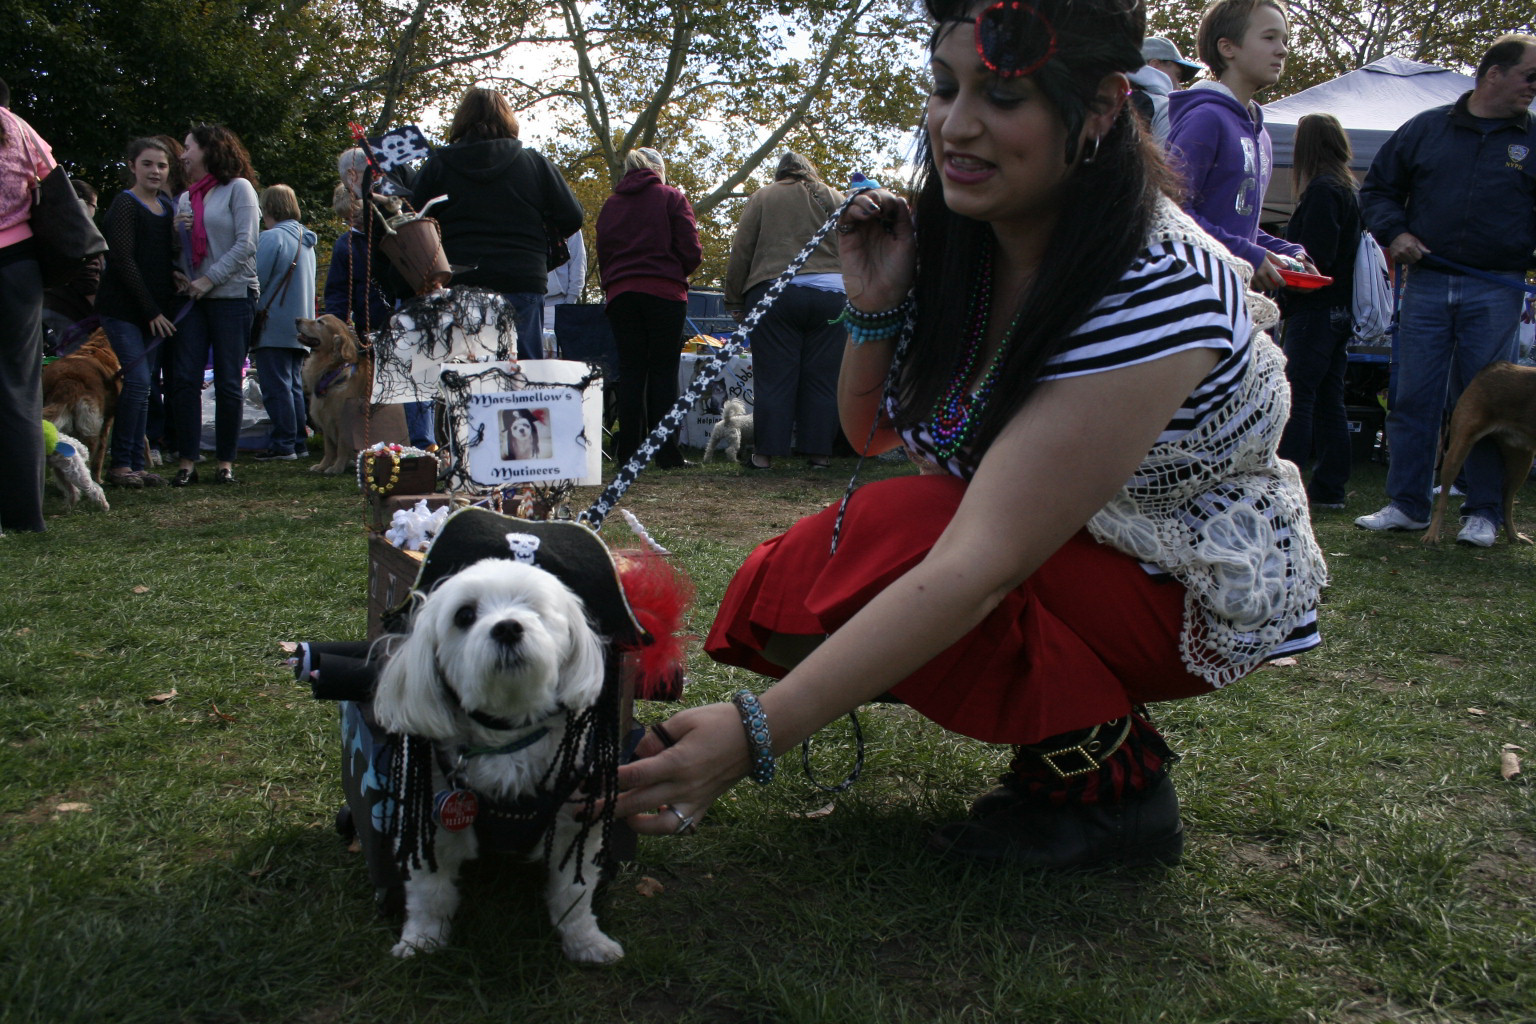 Marshmallow the one-eyed pooch, with owner and crewmate Lea Cohen, was captain of their homemade pirate ship.